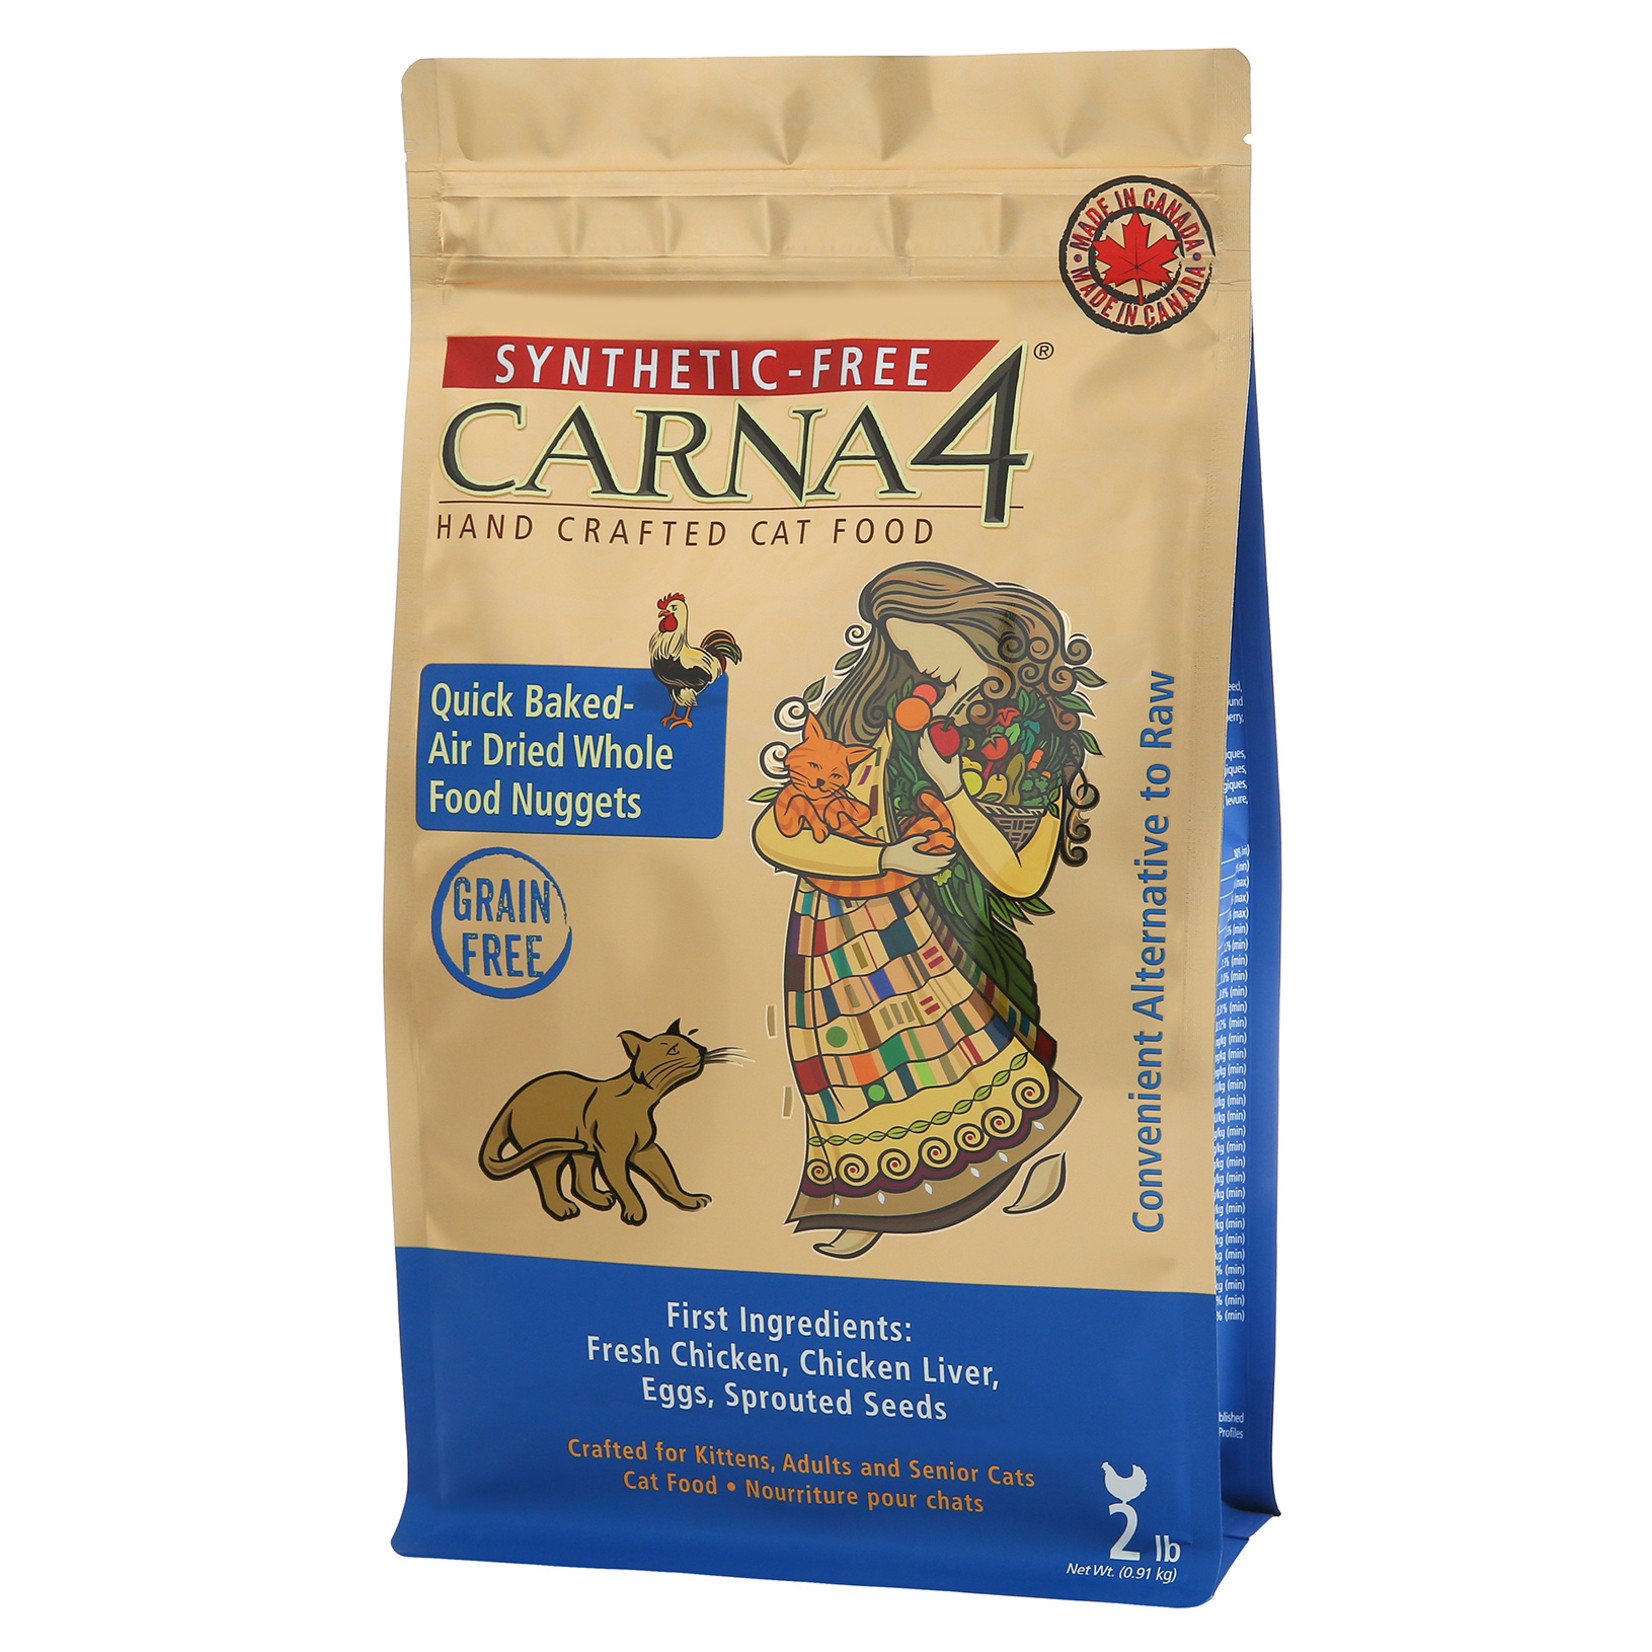 Carna4 Hand Crafted Pet Food Carna4 Hand Crafted Cat Food - Grain Free Chicken Formula